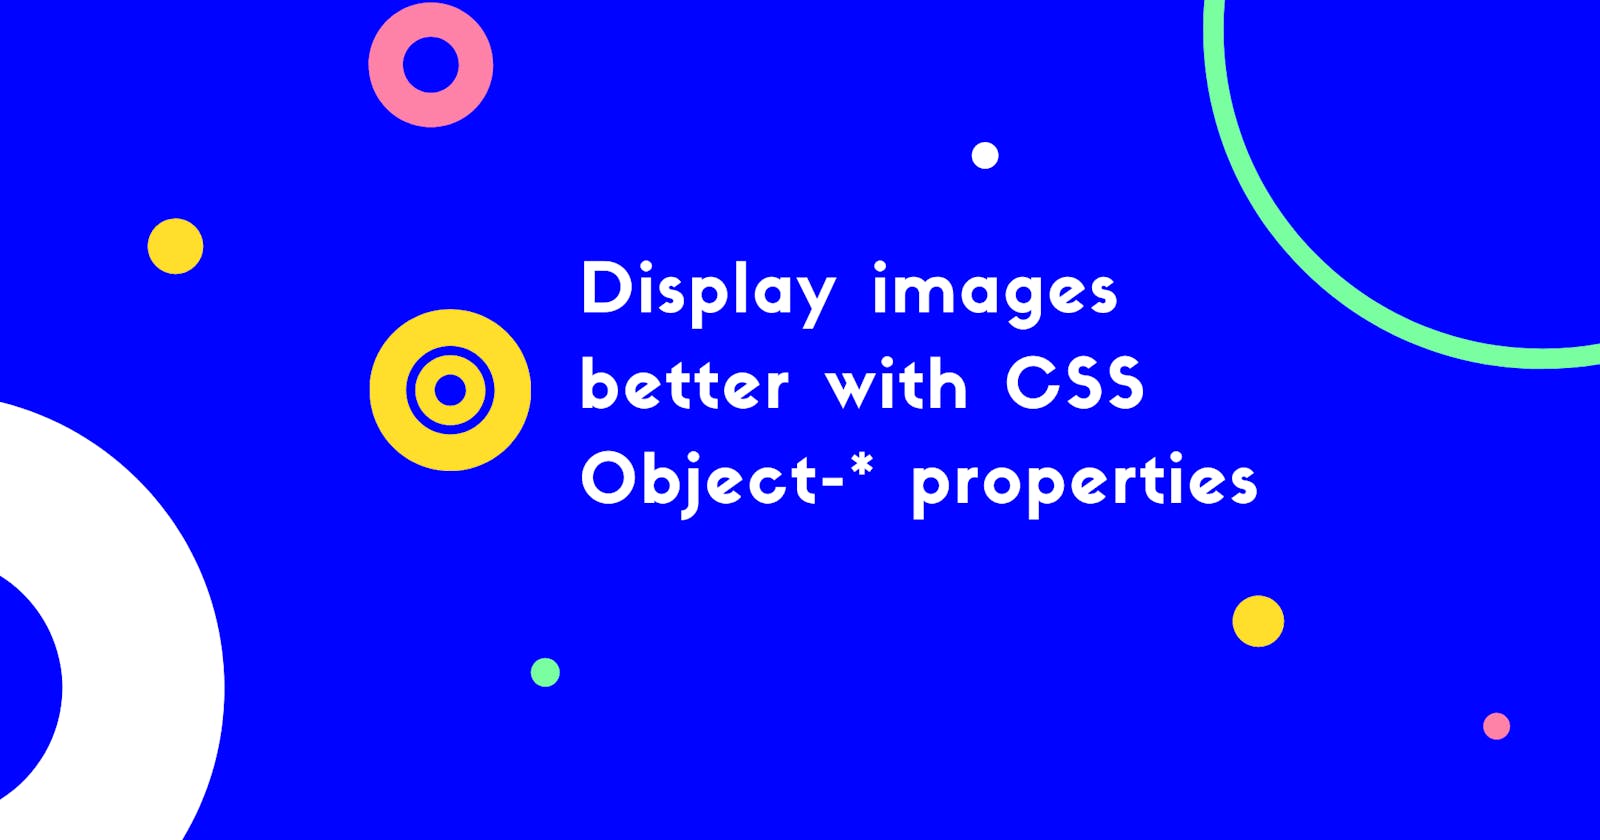 Display images better with CSS Object-* properties